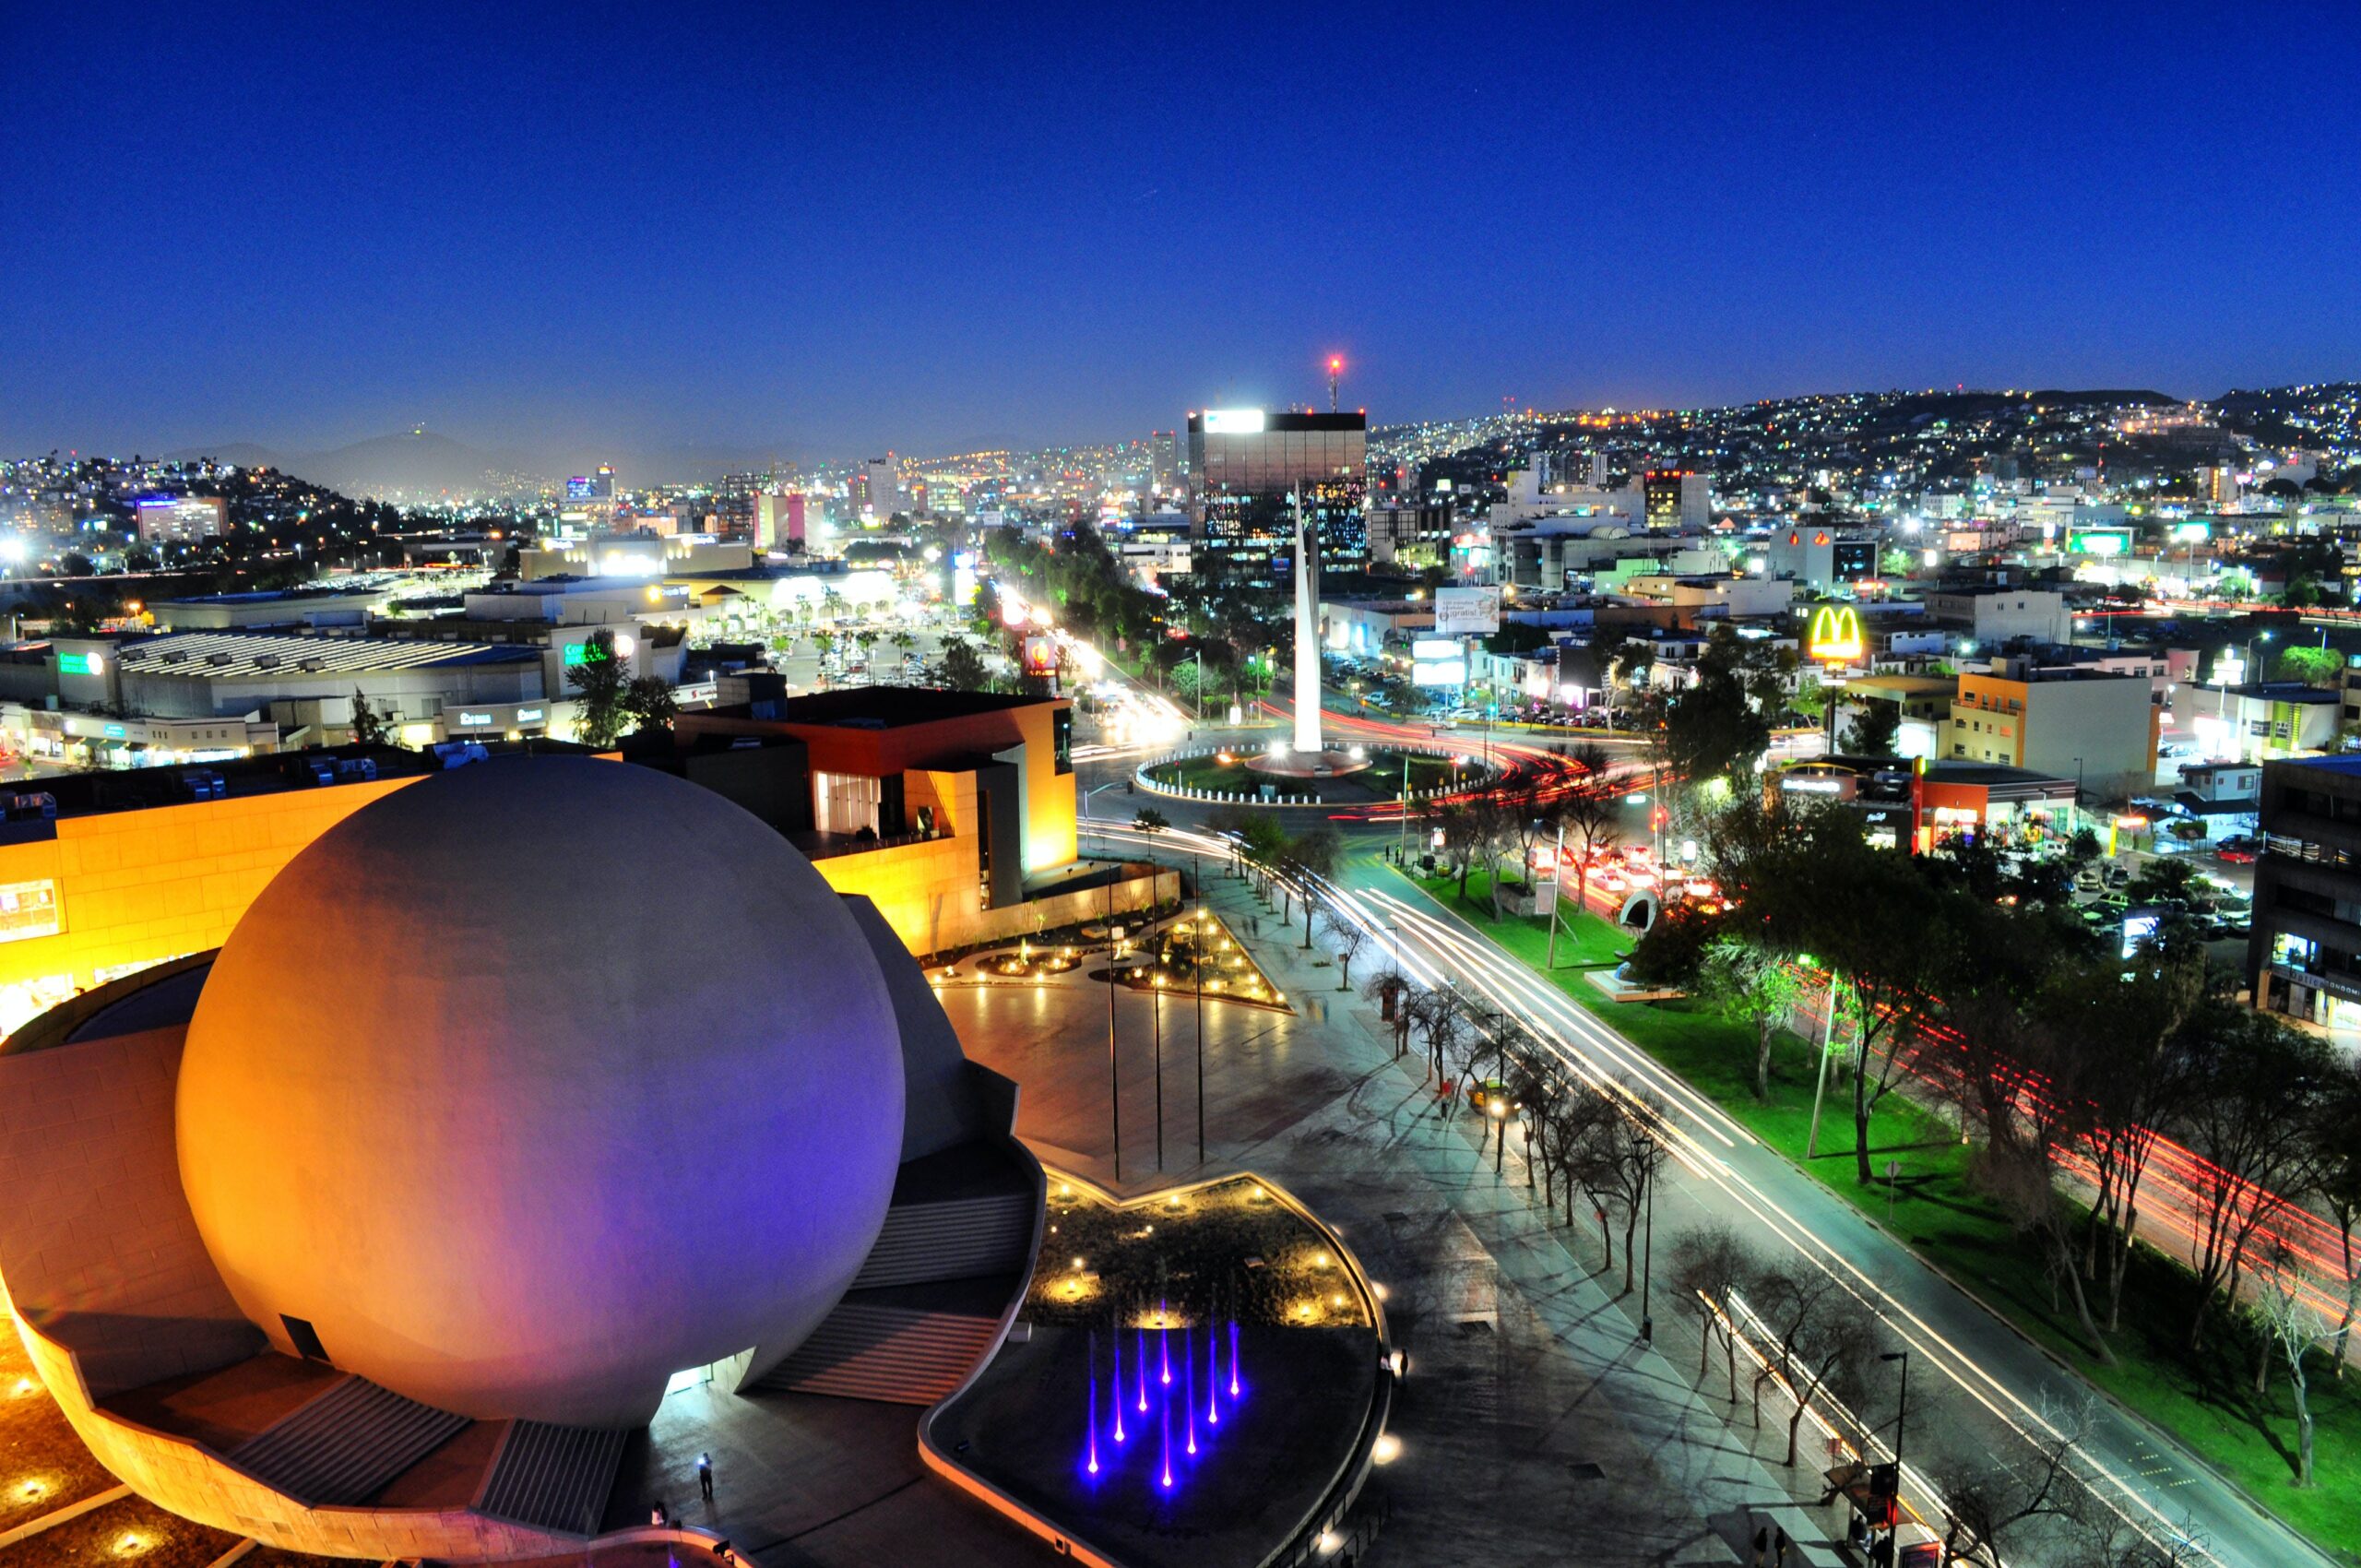 Tijuana, Mexico at night, with buildings, lights and the iconic bola movie theater.